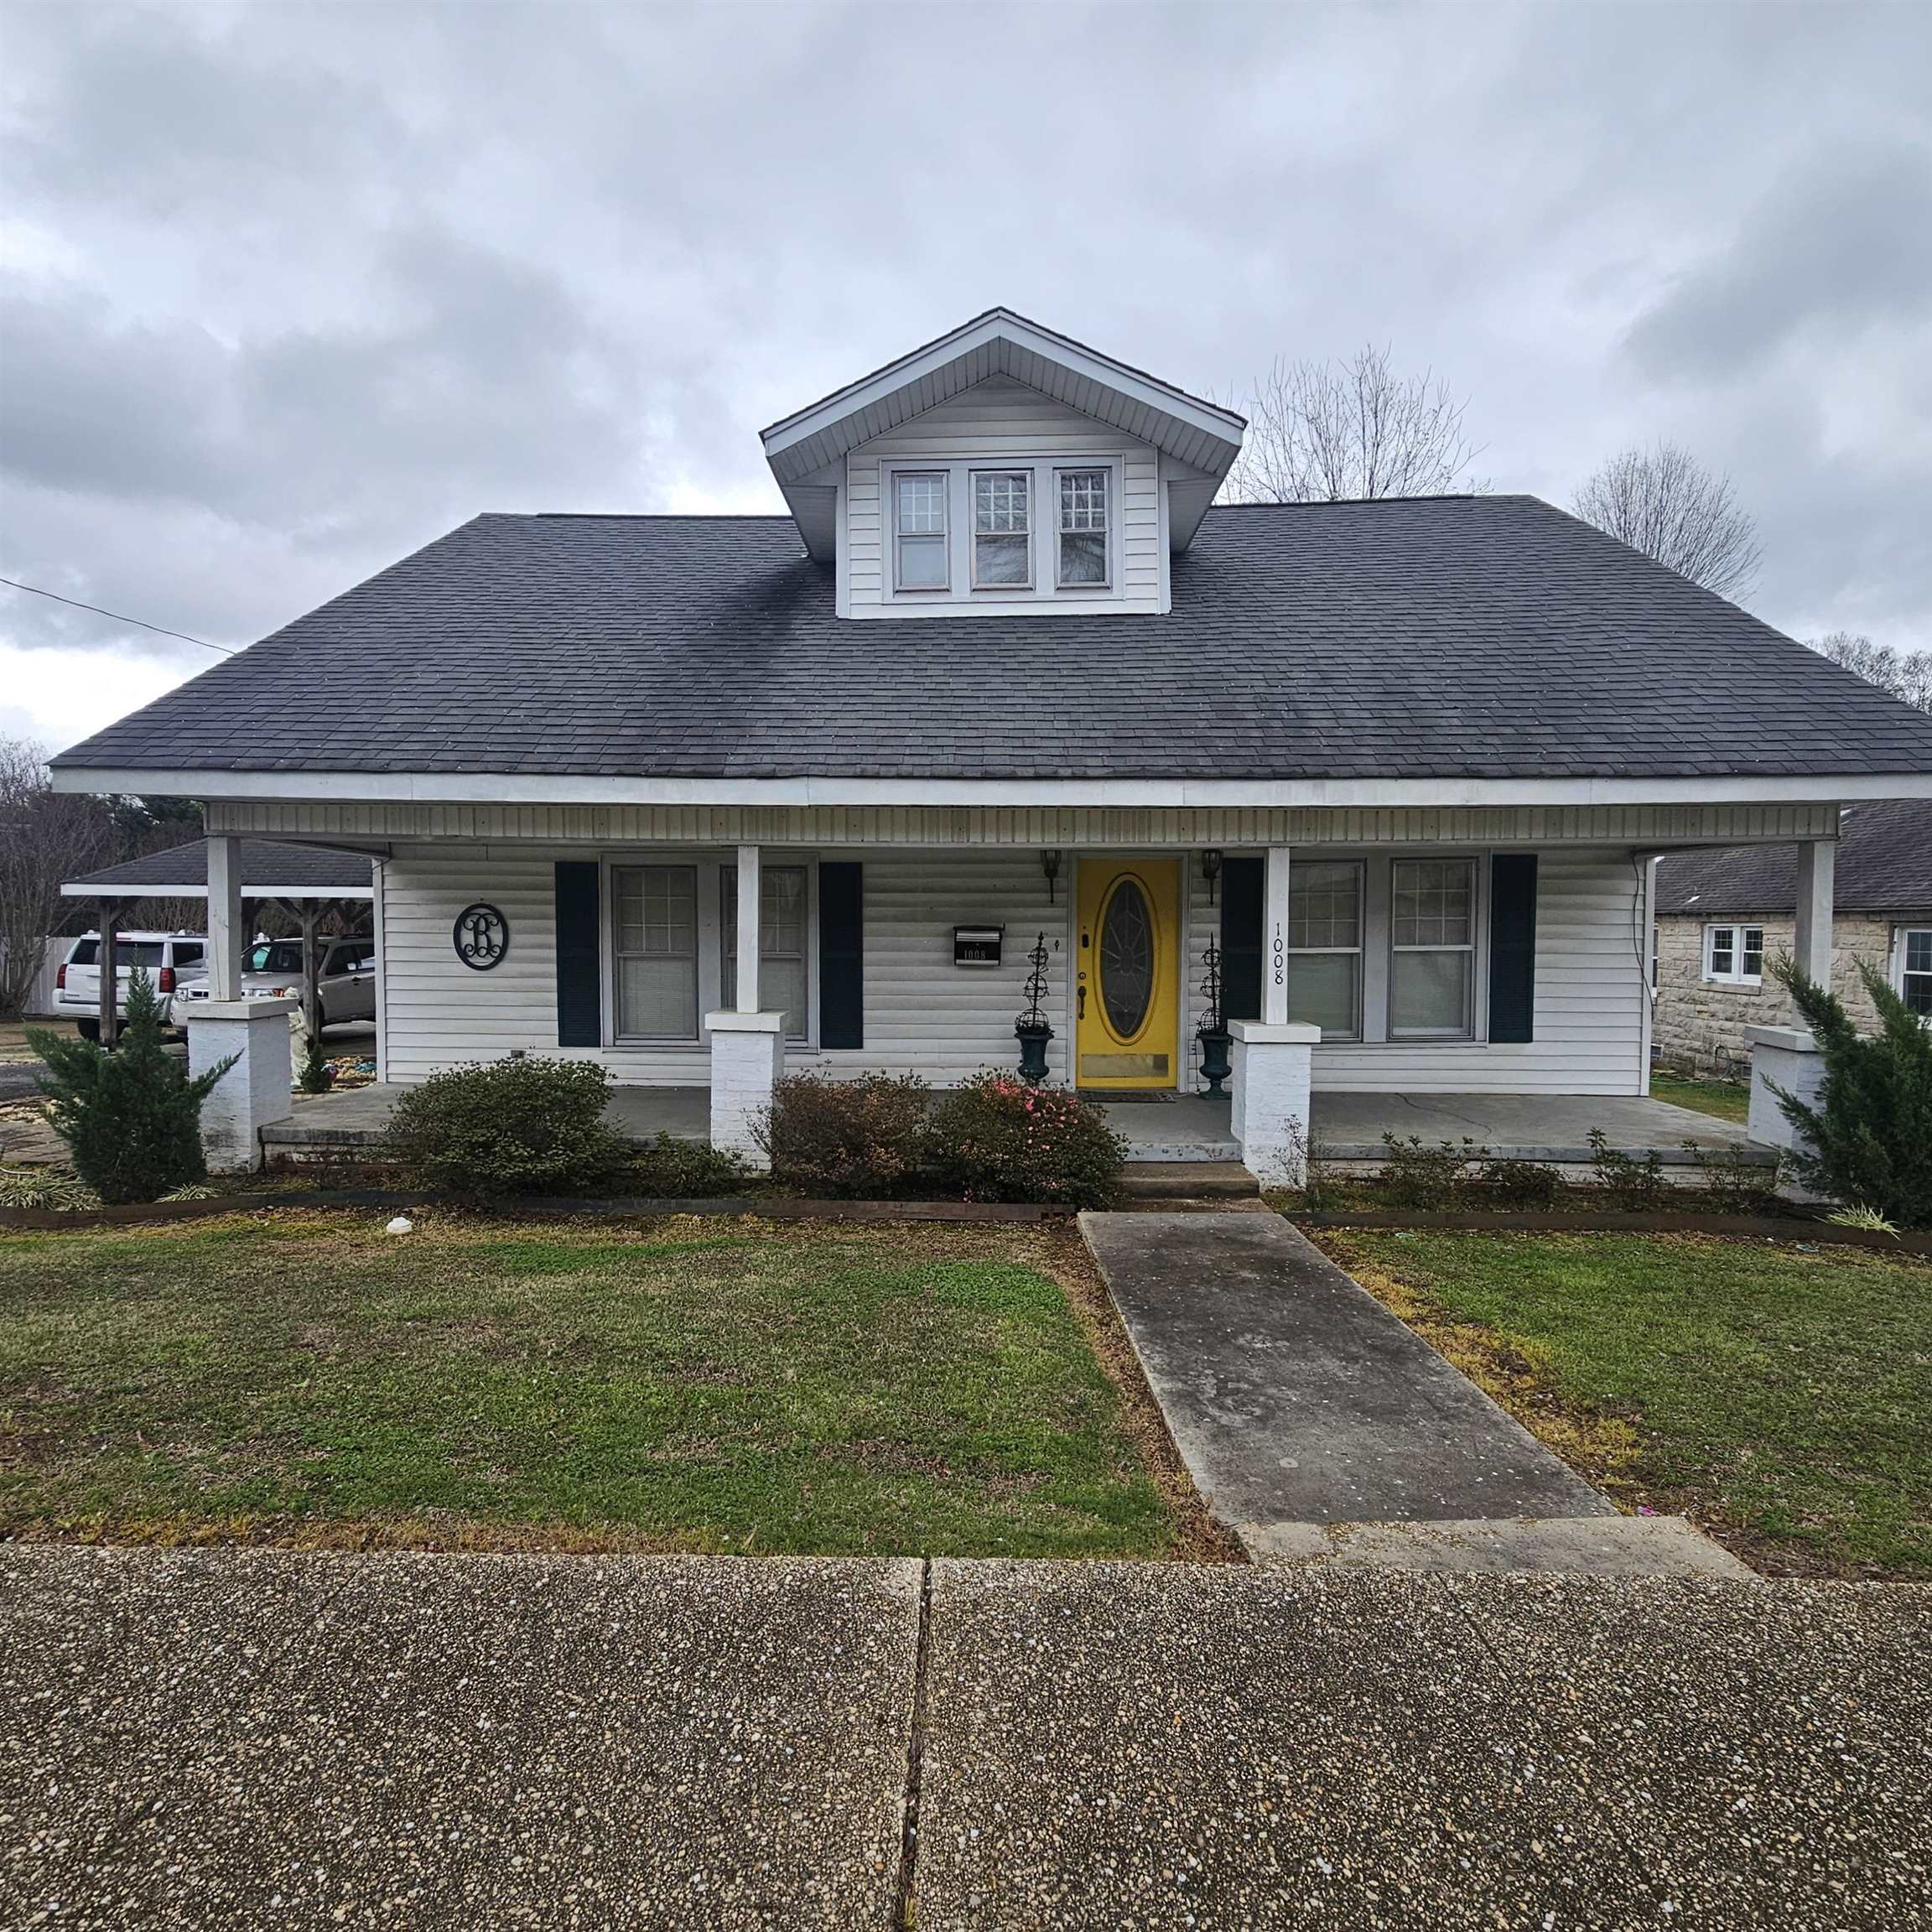 Come take a look at this adorable 3 bedroom, 2 bath home.  Located within walking distance of downtown Russellville.  Enjoy your time outside on the large front porch or on the screened porch around back.  Beautiful back yard with a large pole barn.  Hable Espanol